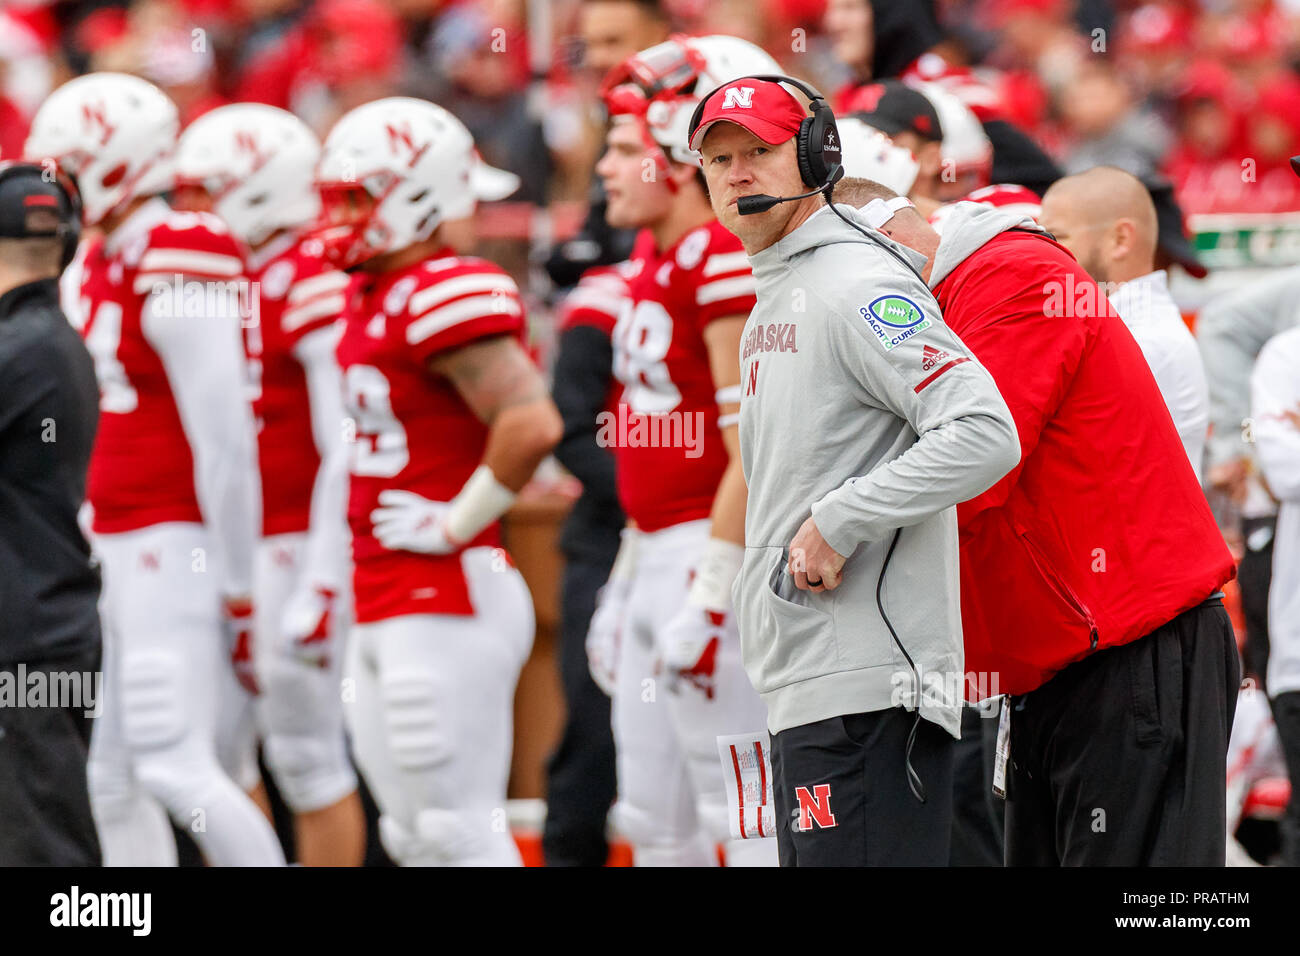 Lincoln, NE. U.S. 29th Sep, 2018. Nebraska Cornhuskers head coach Scott Frost during a NCAA Division 1 football game between Purdue Boilermakers and the Nebraska Cornhuskers at Memorial Stadium in Lincoln, NE.Attendance: 88,911.Purdue won 42-28.Michael Spomer/Cal Sport Media/Alamy Live News Stock Photo